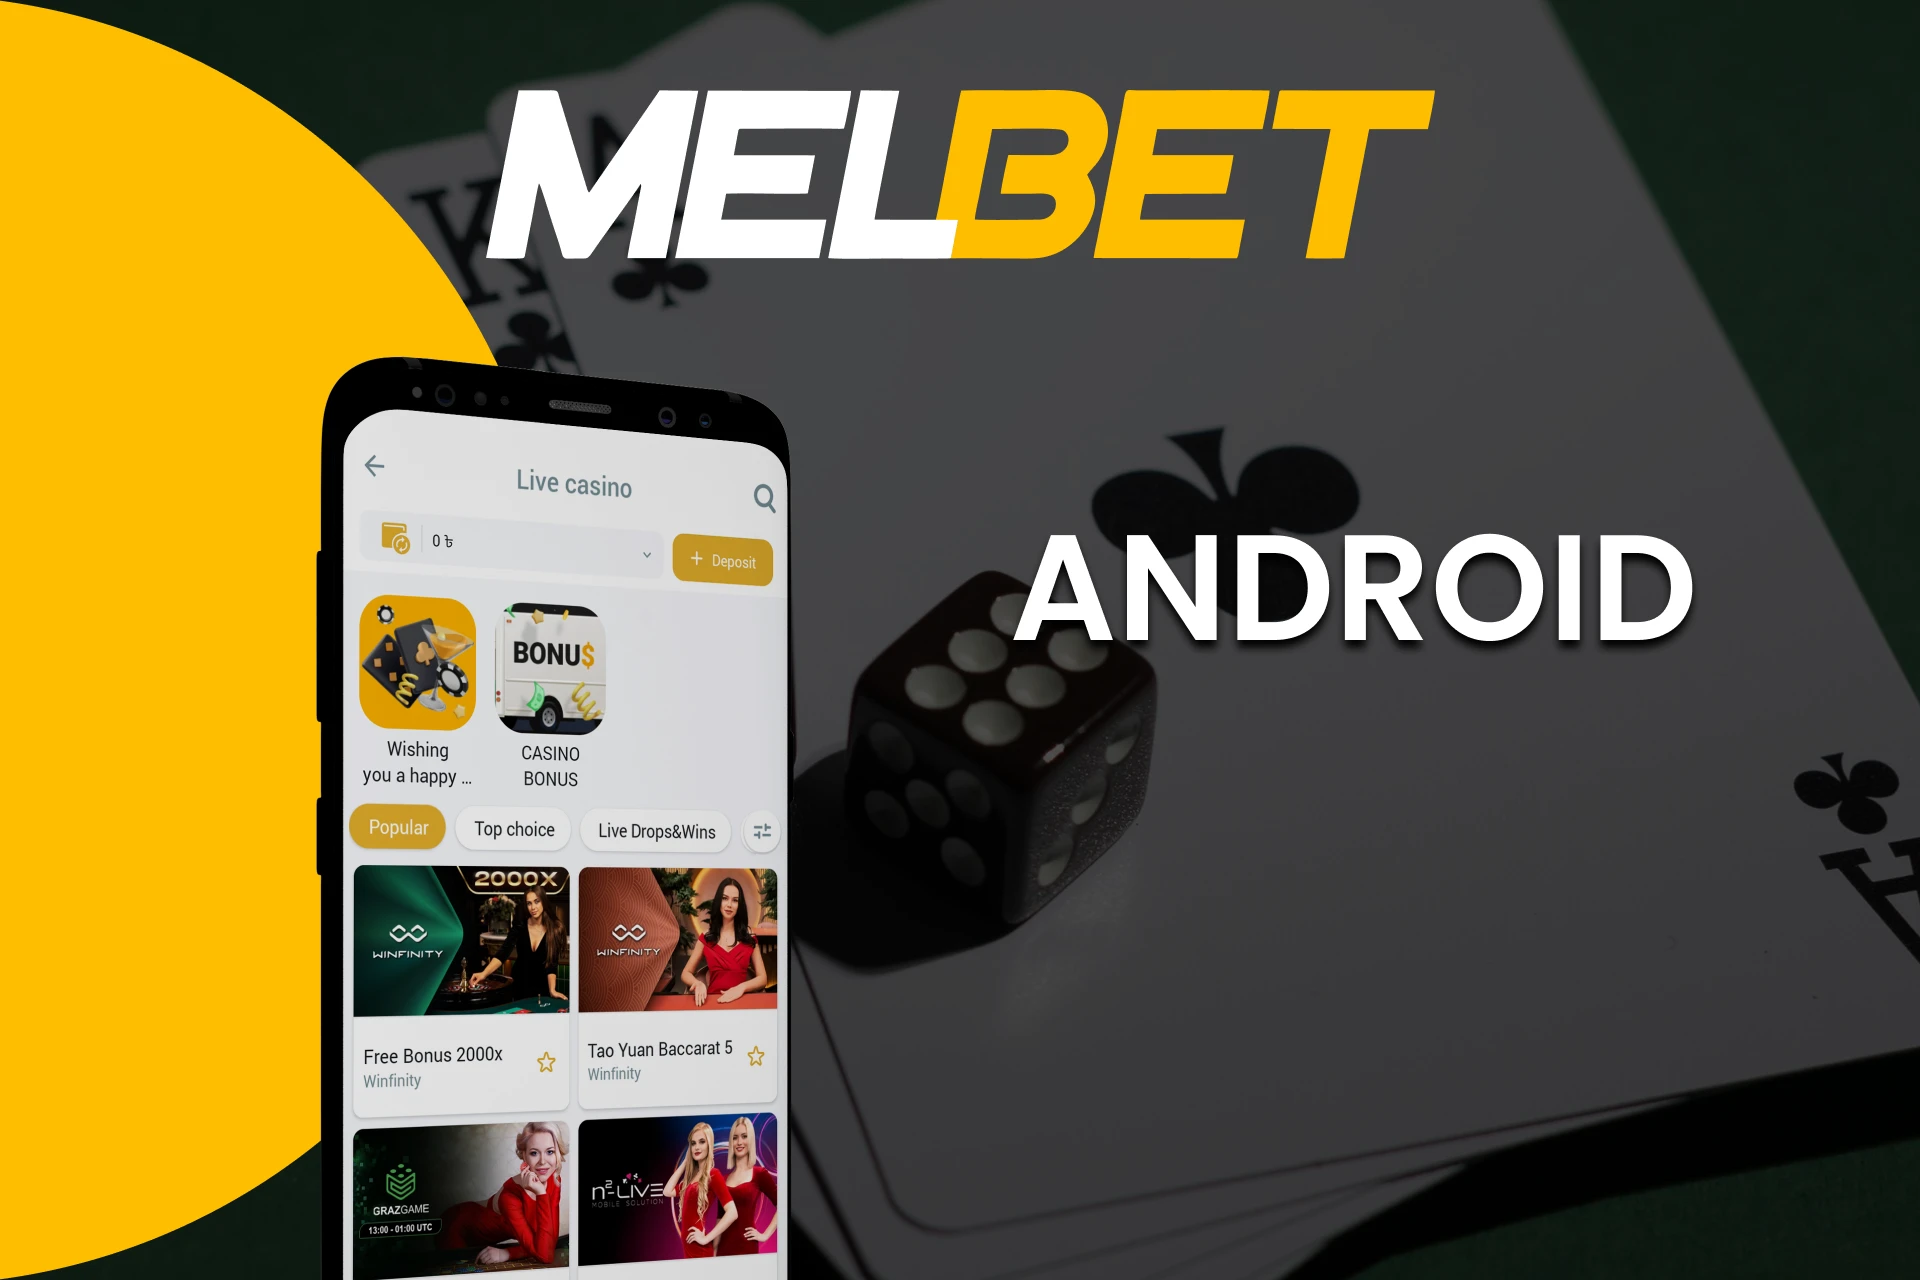 Download the Melbet app on Android to play Live Casino.